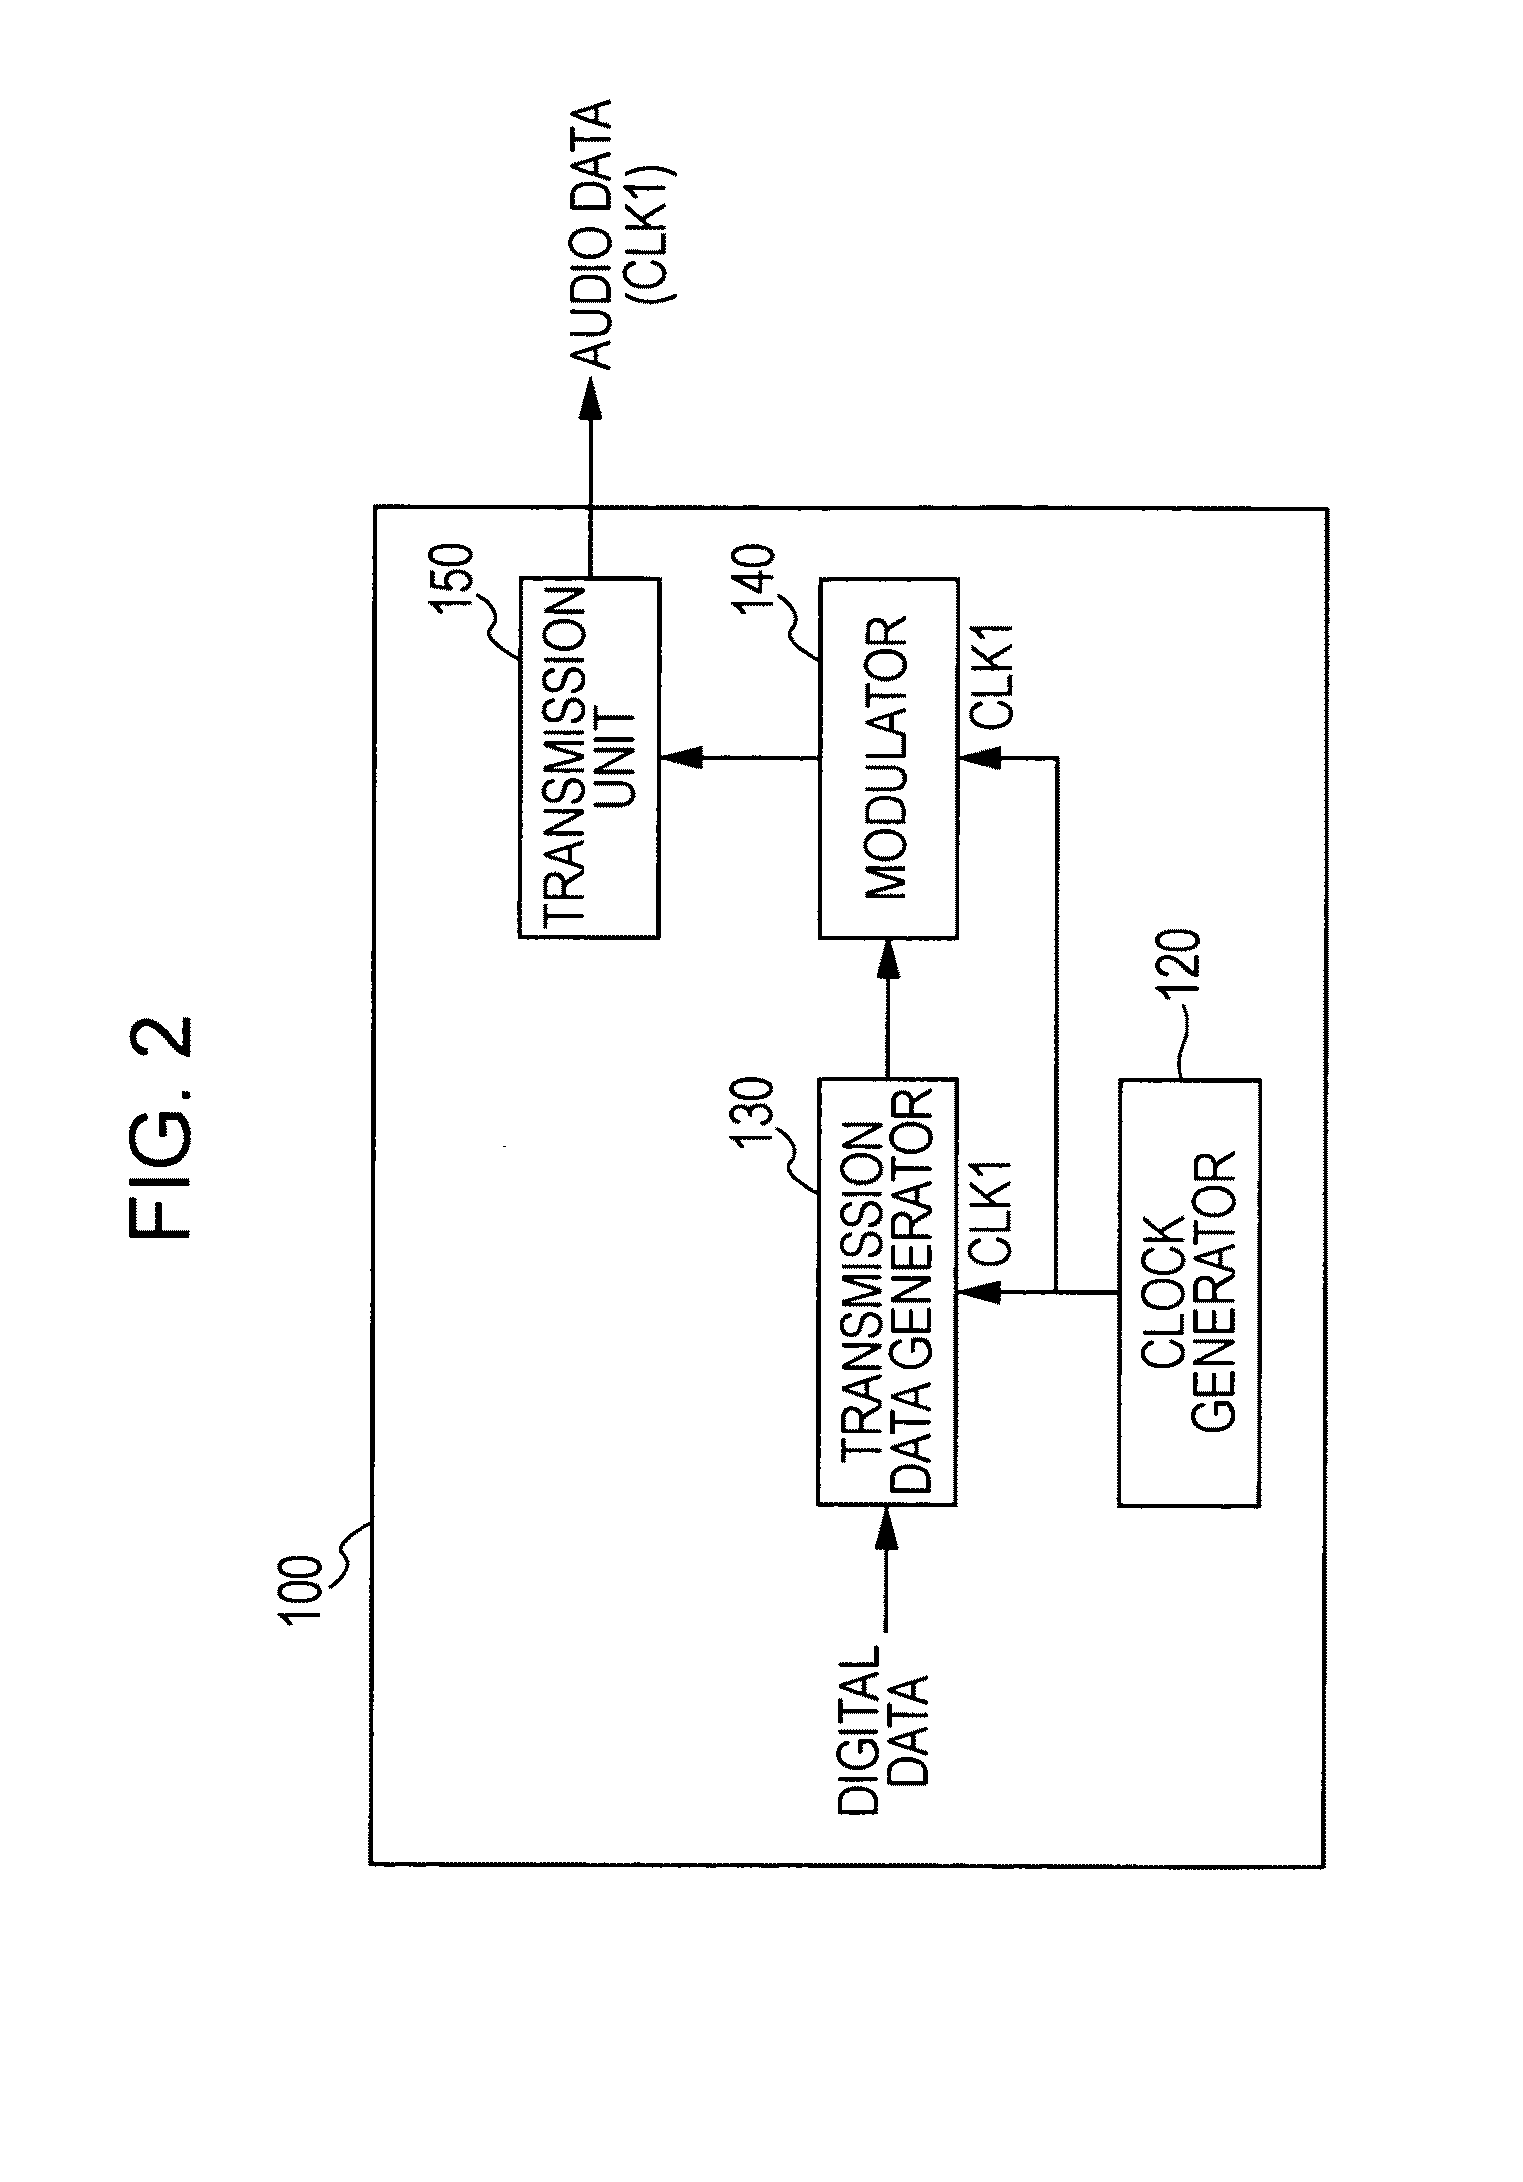 Audio data receiving apparatus, audio data receiving method, and audio data transmission and receiving system